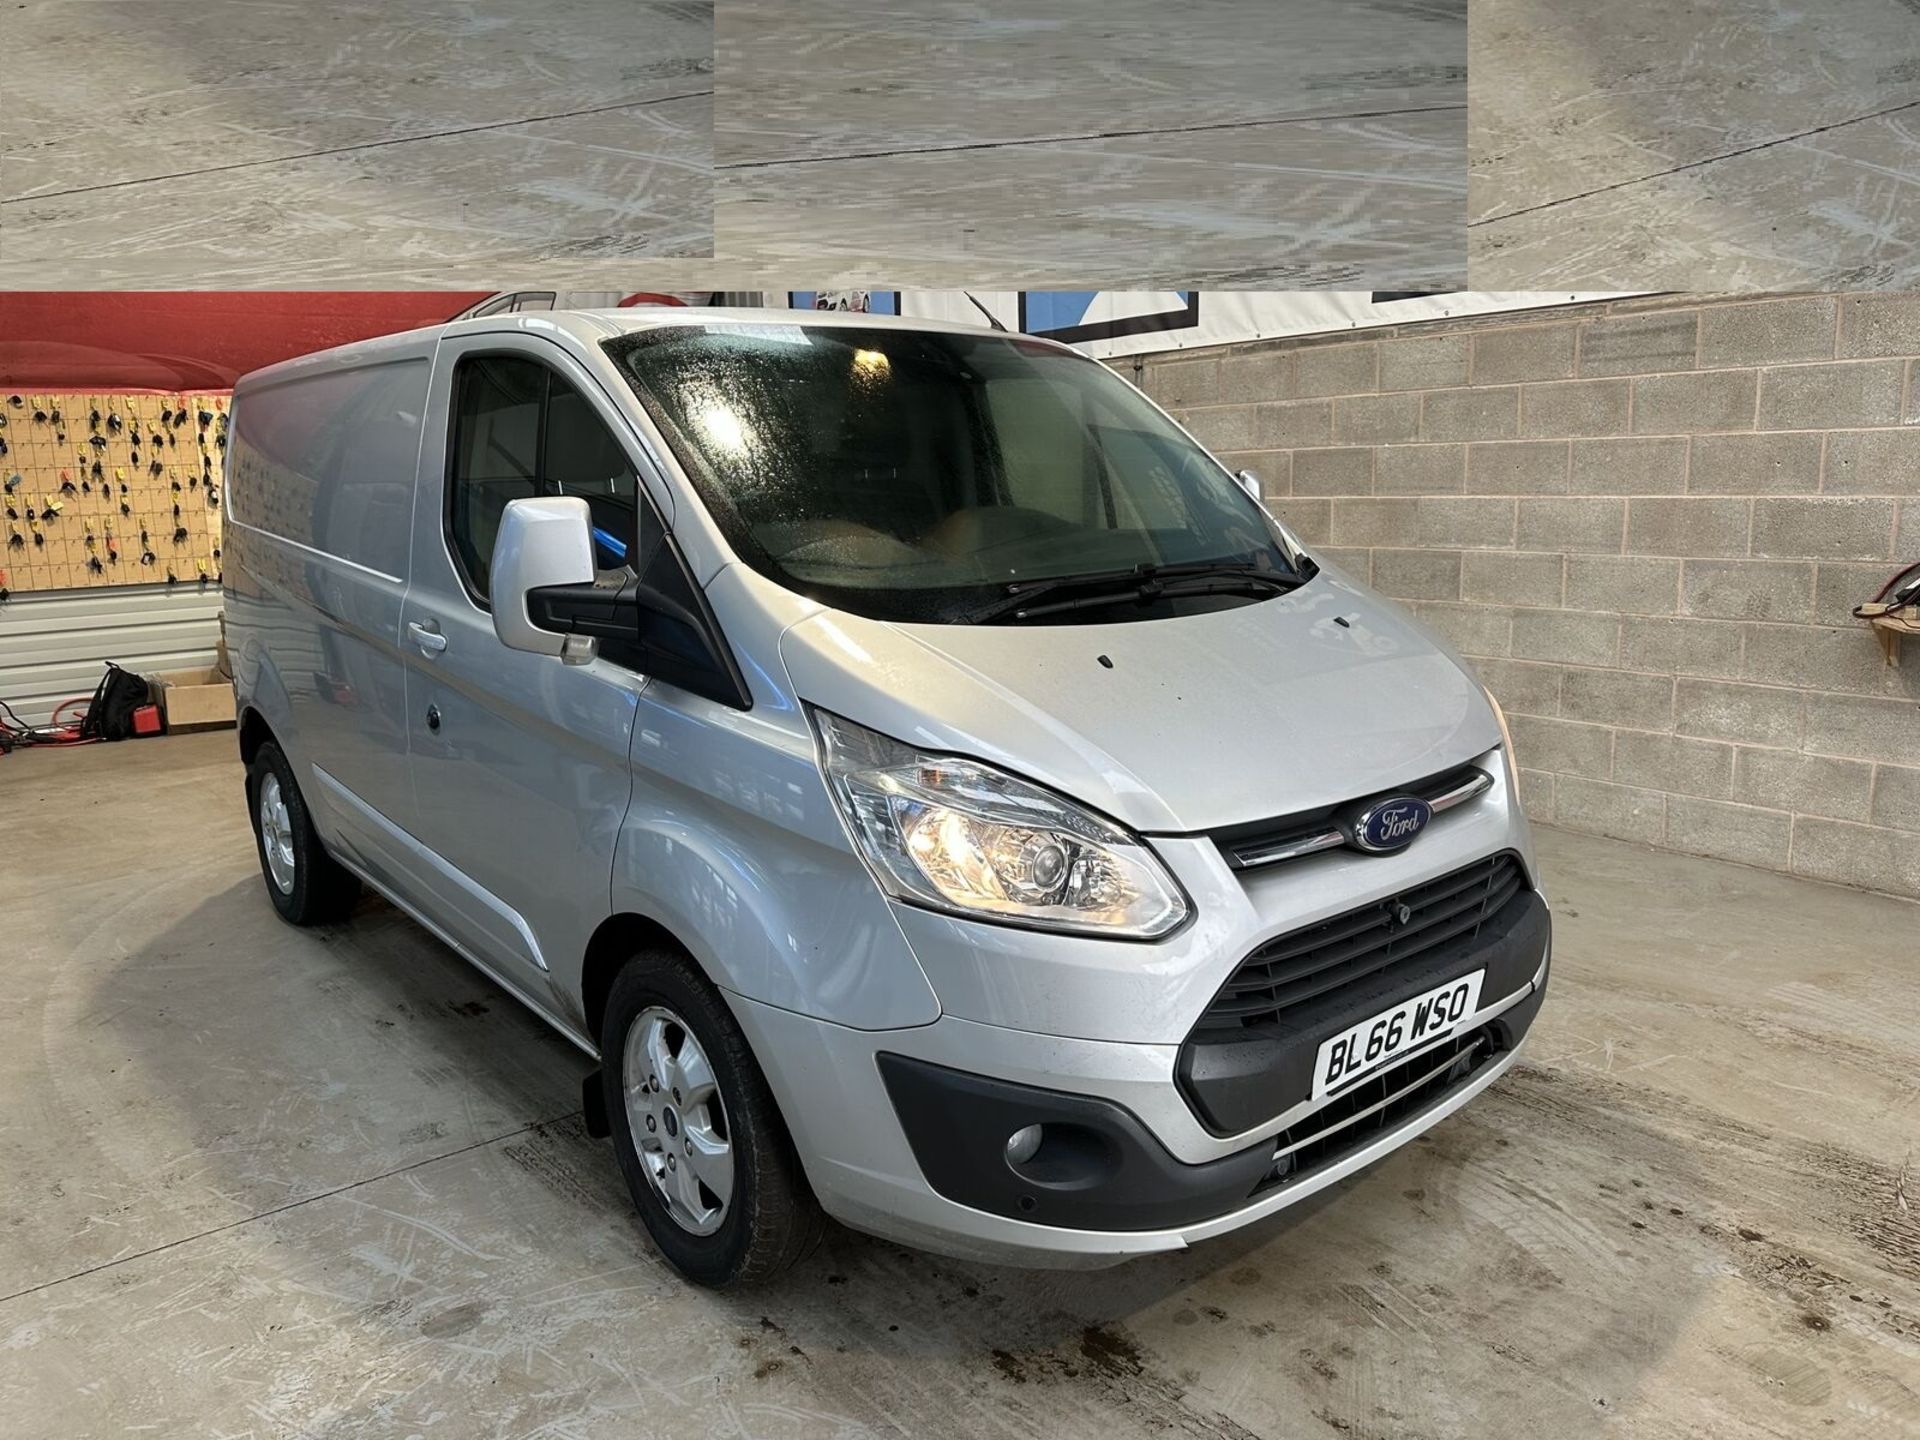 SILVER STUNNER: 2016 TRANSIT CUSTOM 2.0 TDCI 130PS, LIMITED EDITION